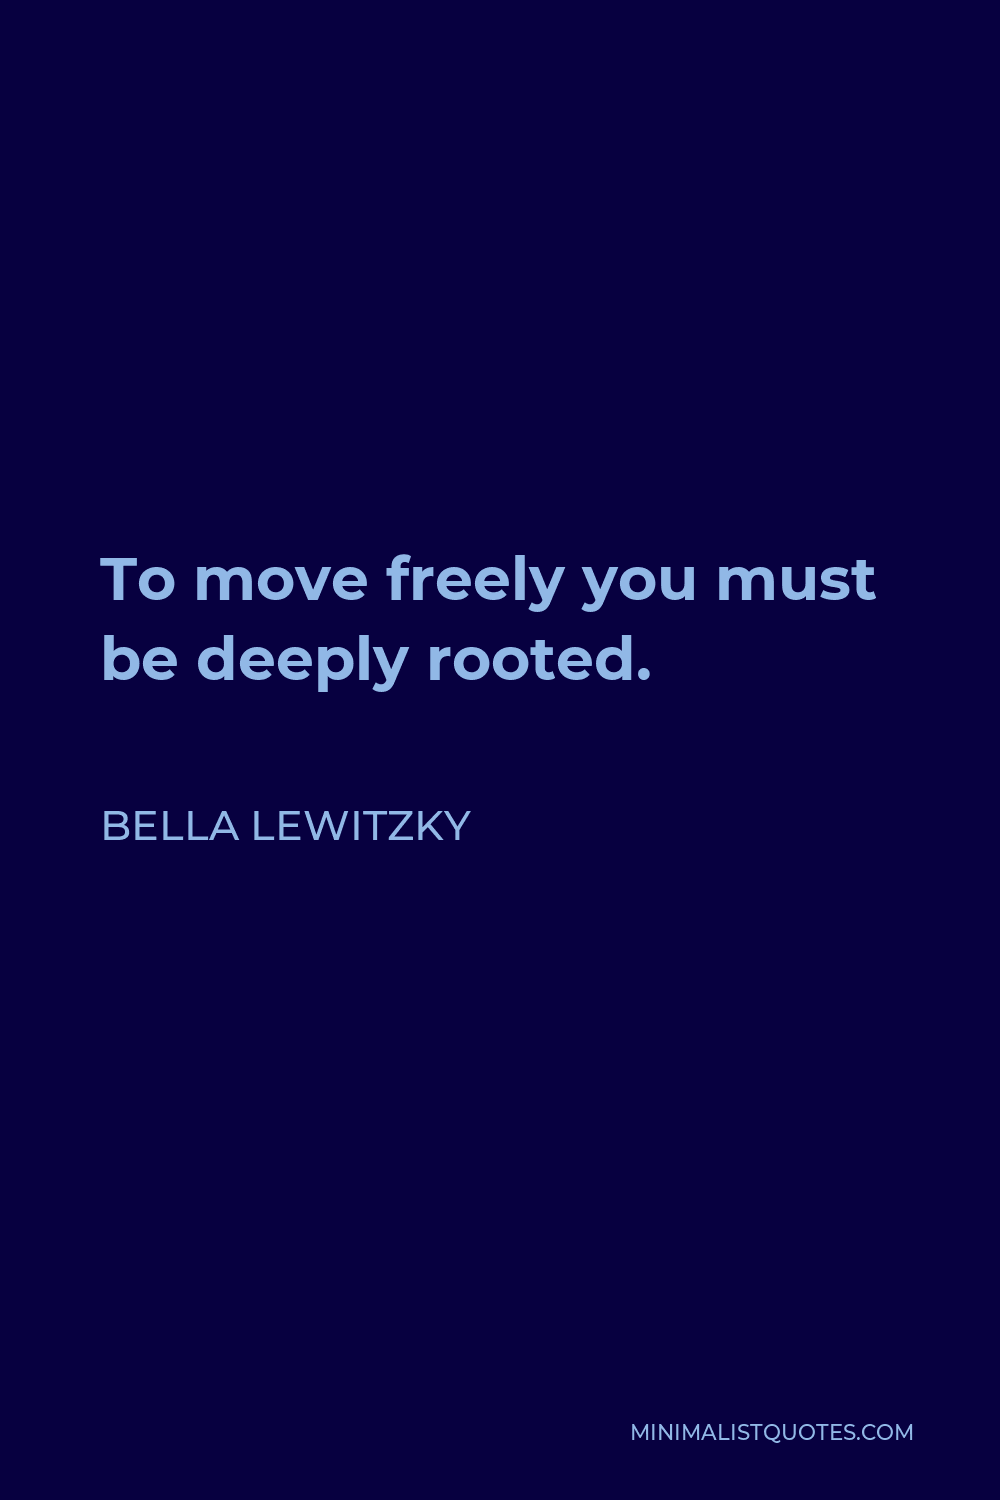 Bella Lewitzky Quote - To move freely you must be deeply rooted.